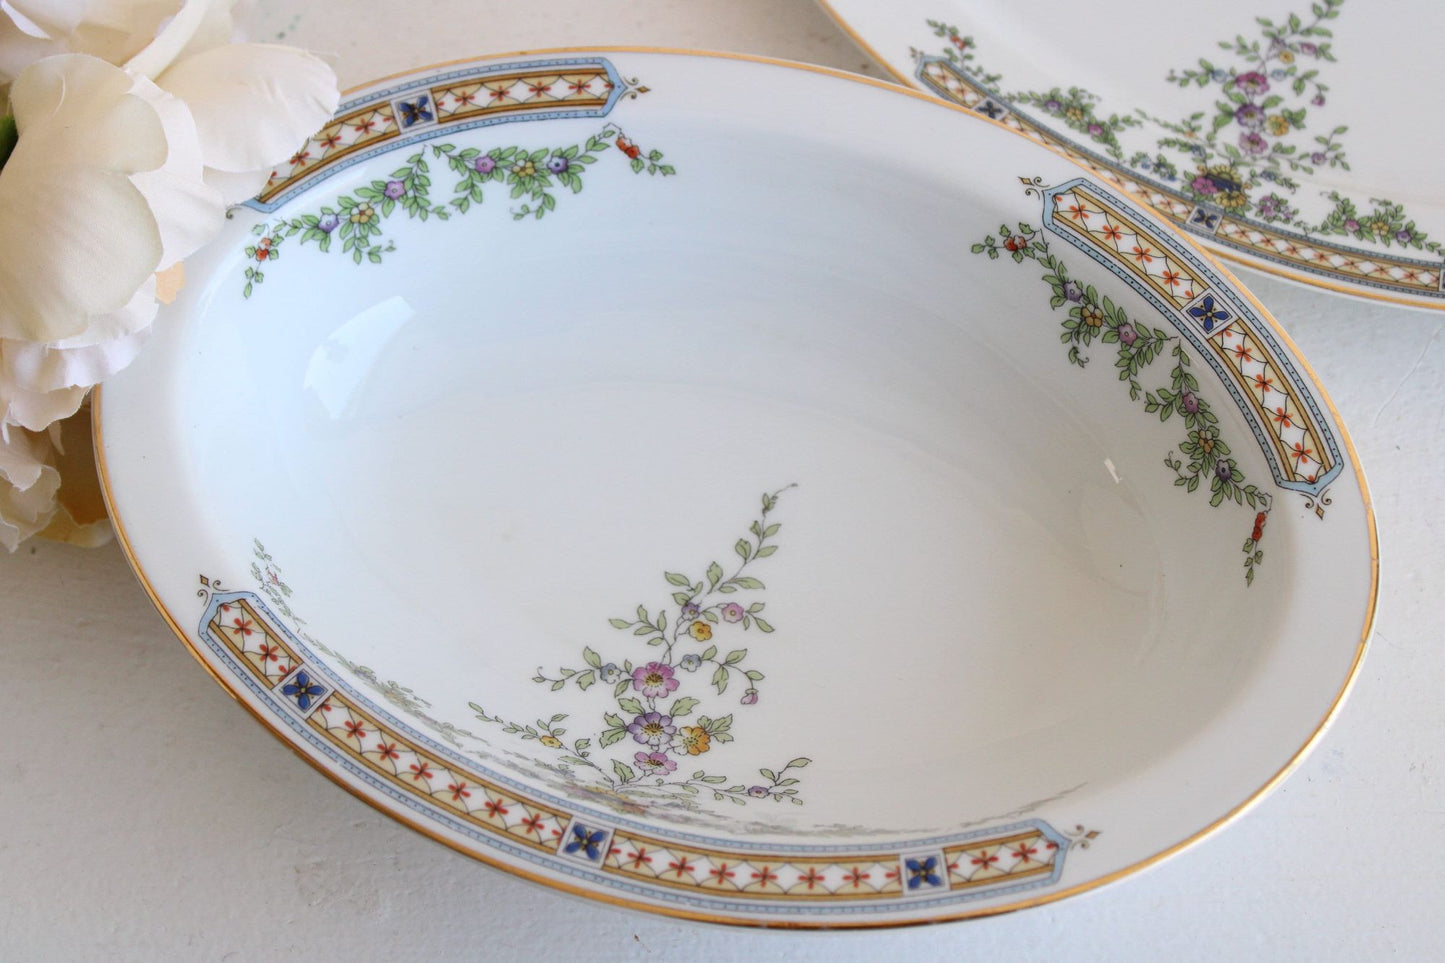 Vintage 1940s Serving Bowl and Plate, 10" and 12" Oval Heinrich & Co Selb Bavaria China Floral Pattern